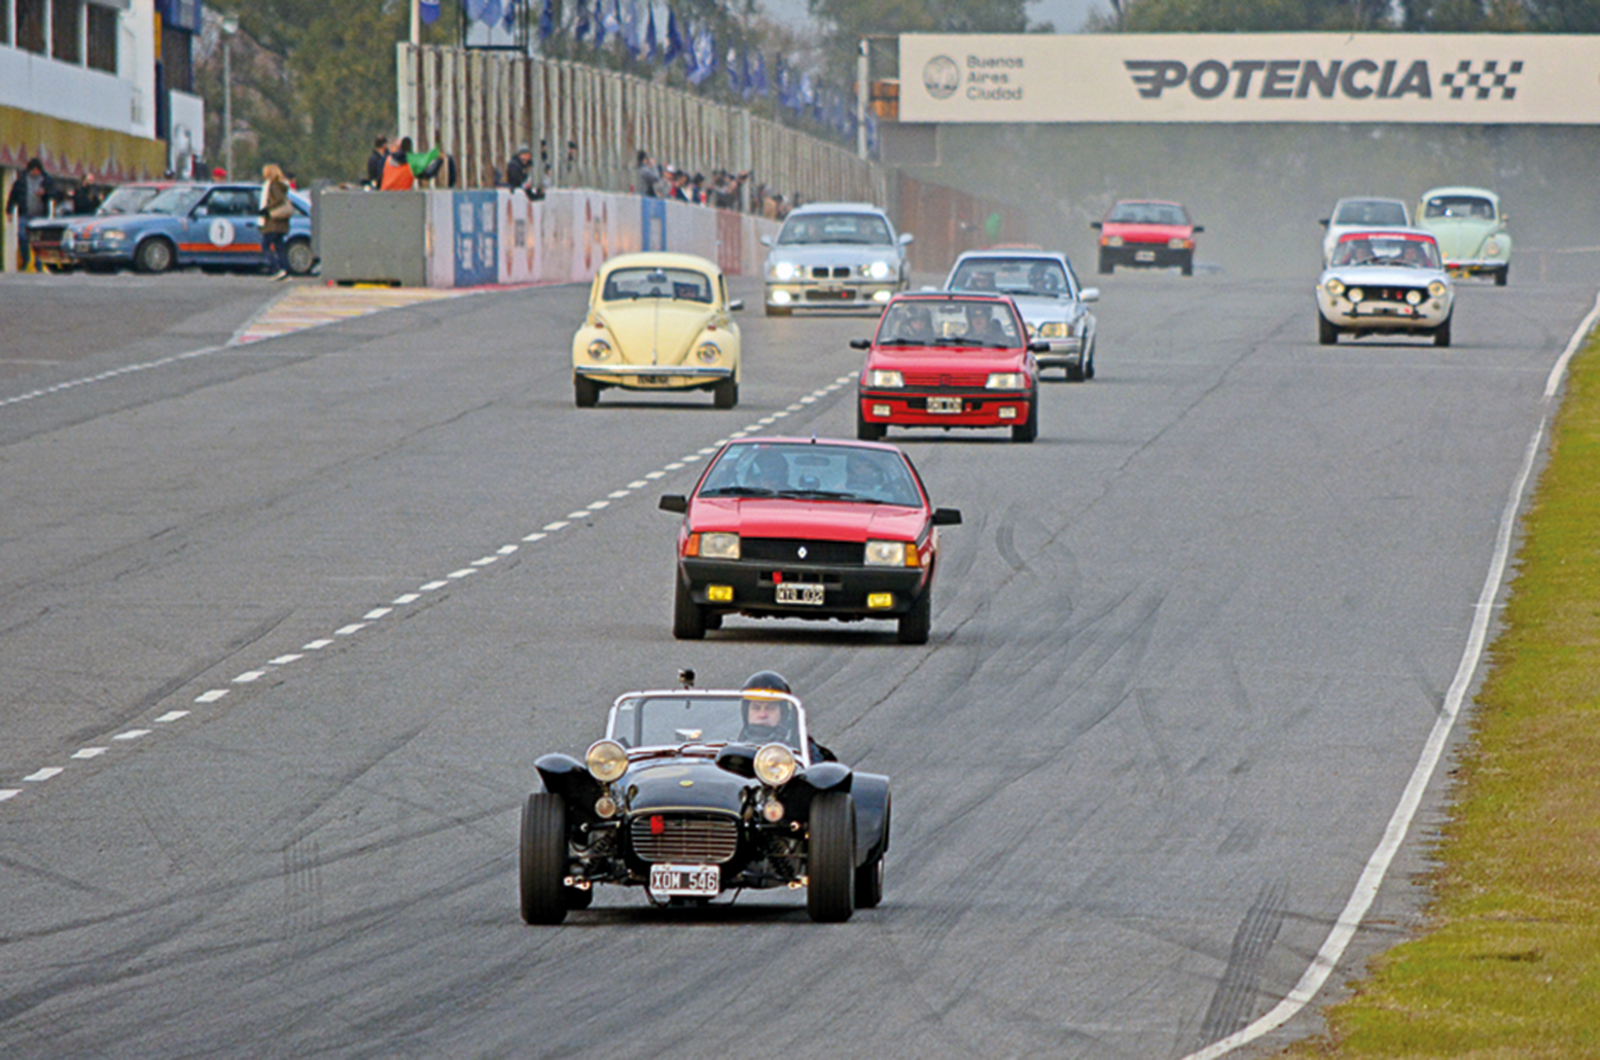 Classic & Sports Car – Your classic: Lotus Seven (Fiat twin-cam)